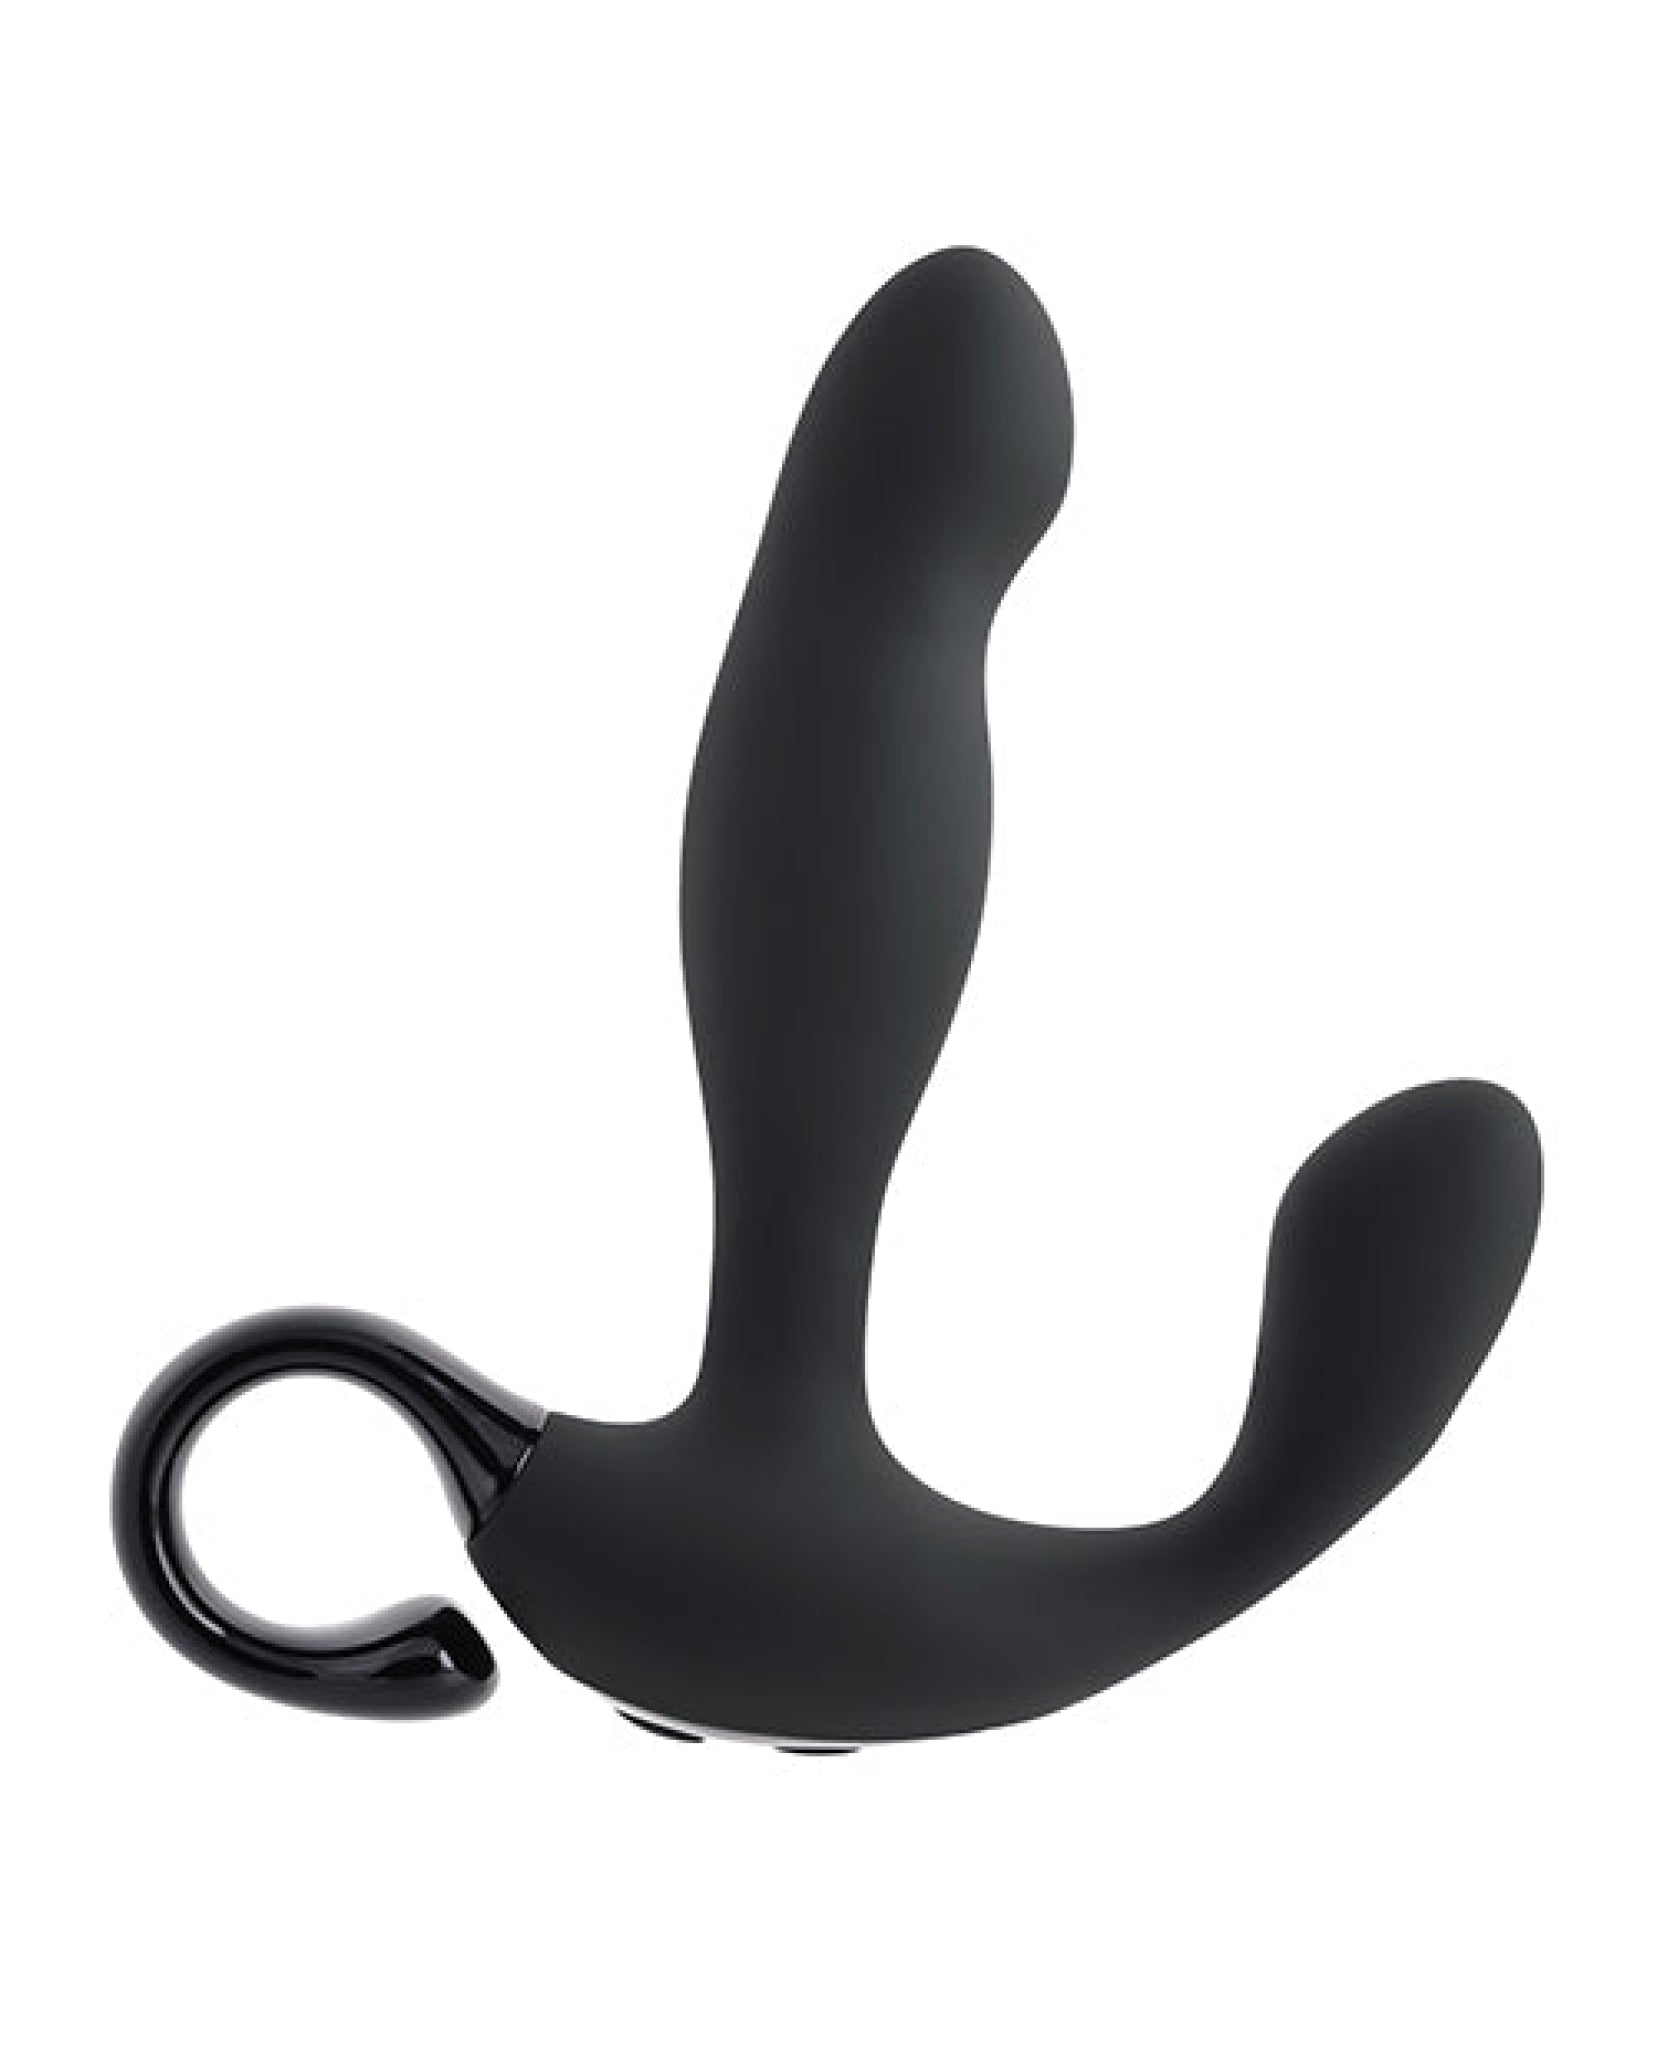 Playboy Pleasure Come Hither Prostate Massager - 2 Am Playboy